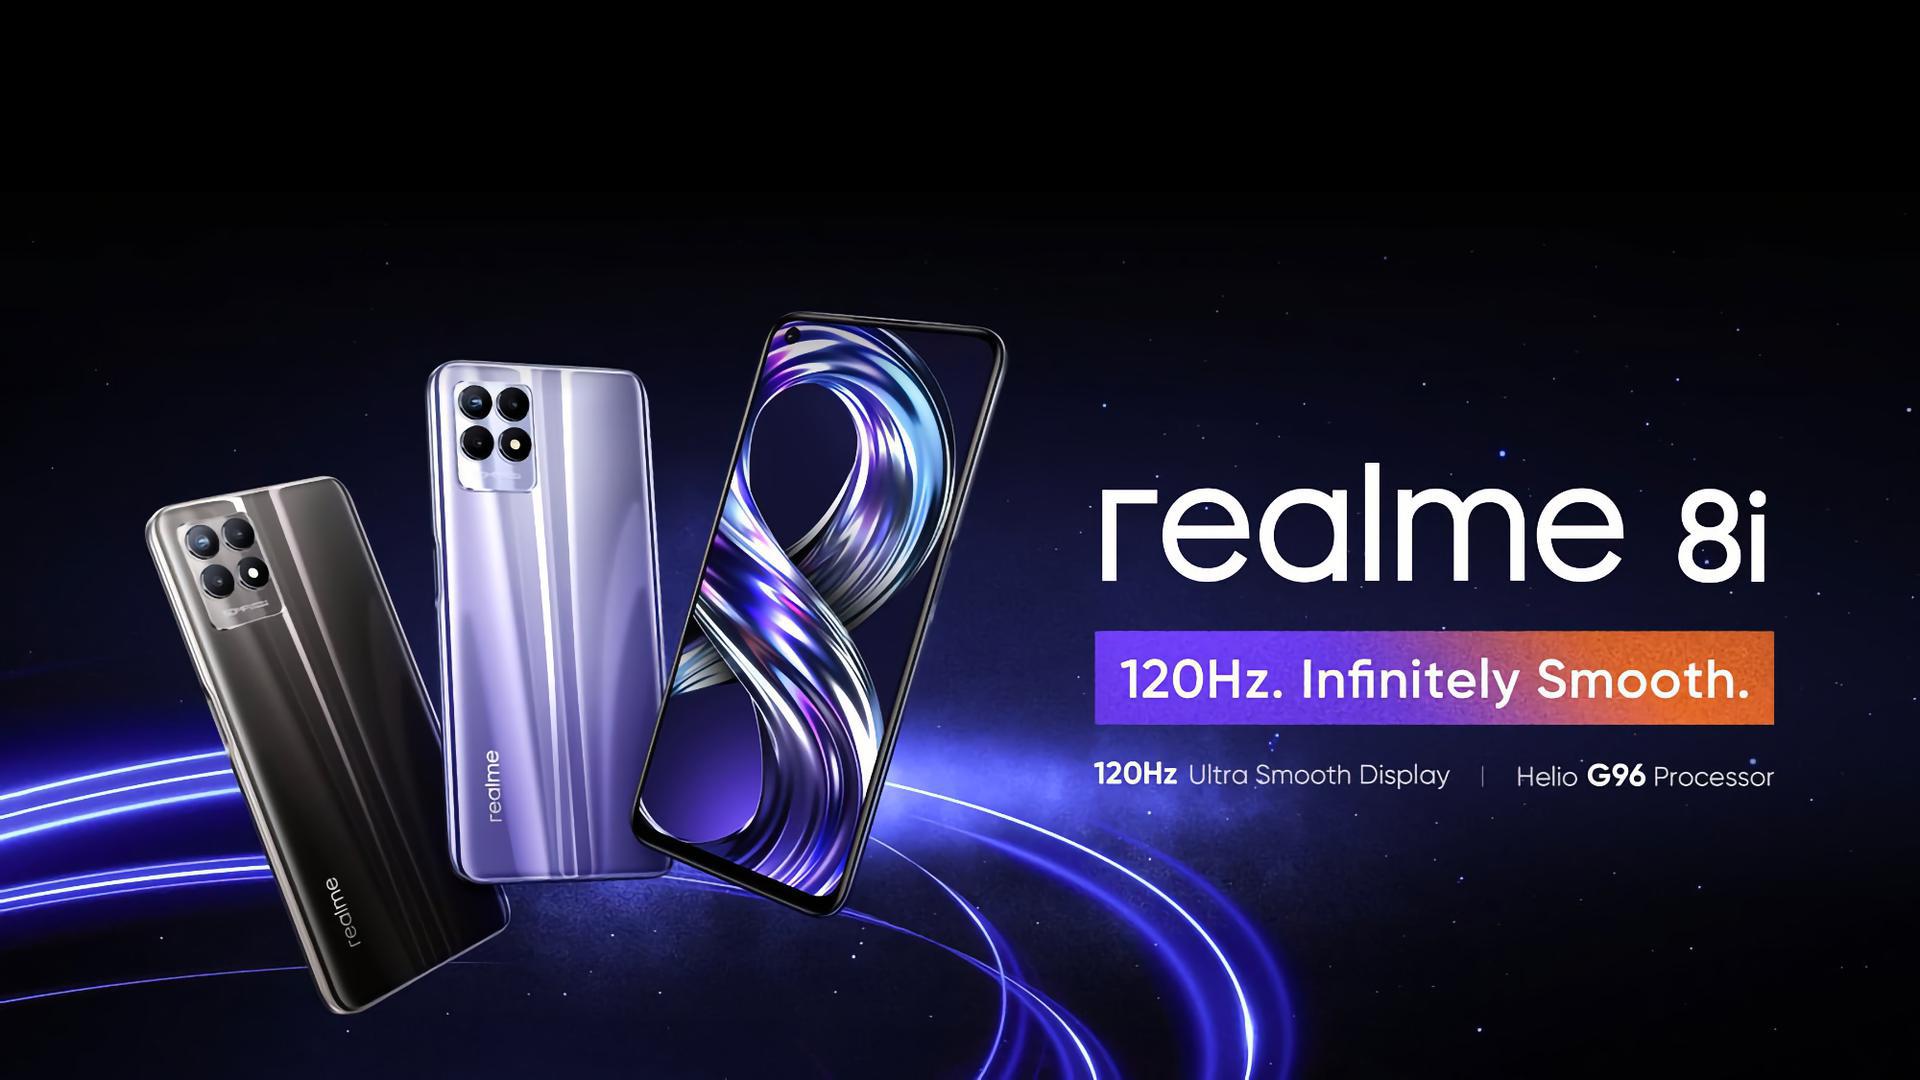 It's official: Realme 8i with NFC, 120 Hz screen and MediaTek Helio G96 chip will be unveiled in Europe on October 14